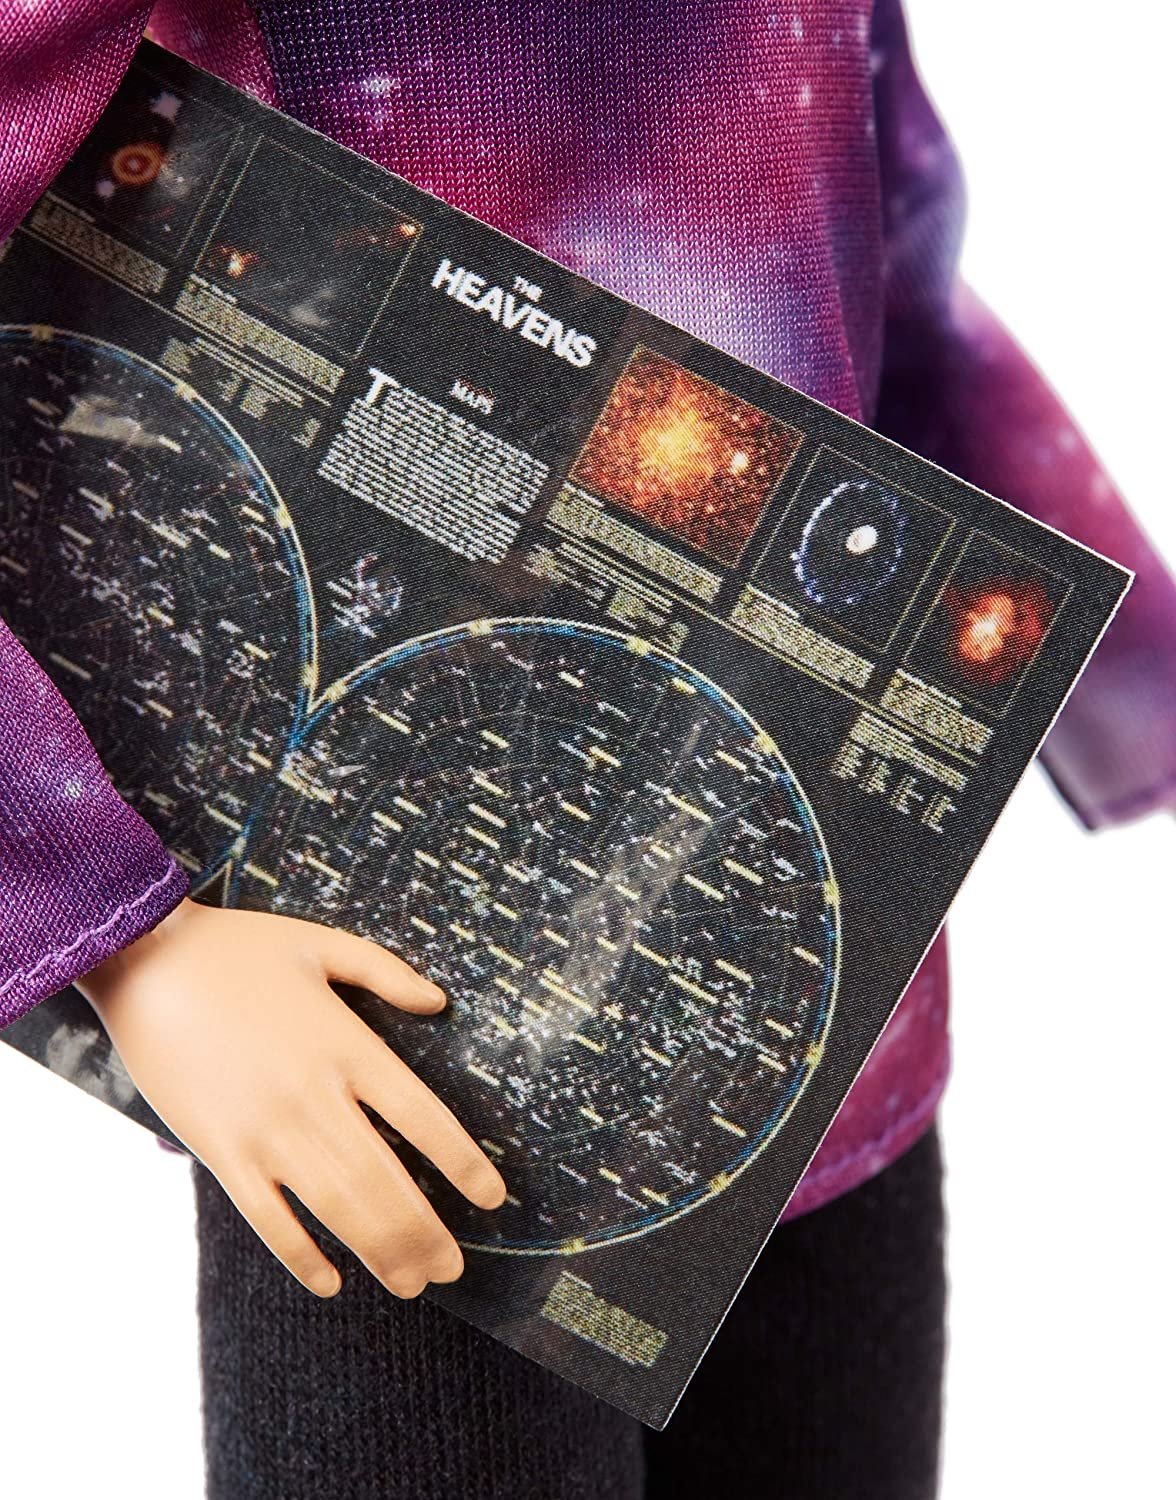 Barbie National Geographic Astrophysicist Doll with Accessories - image 4 of 6